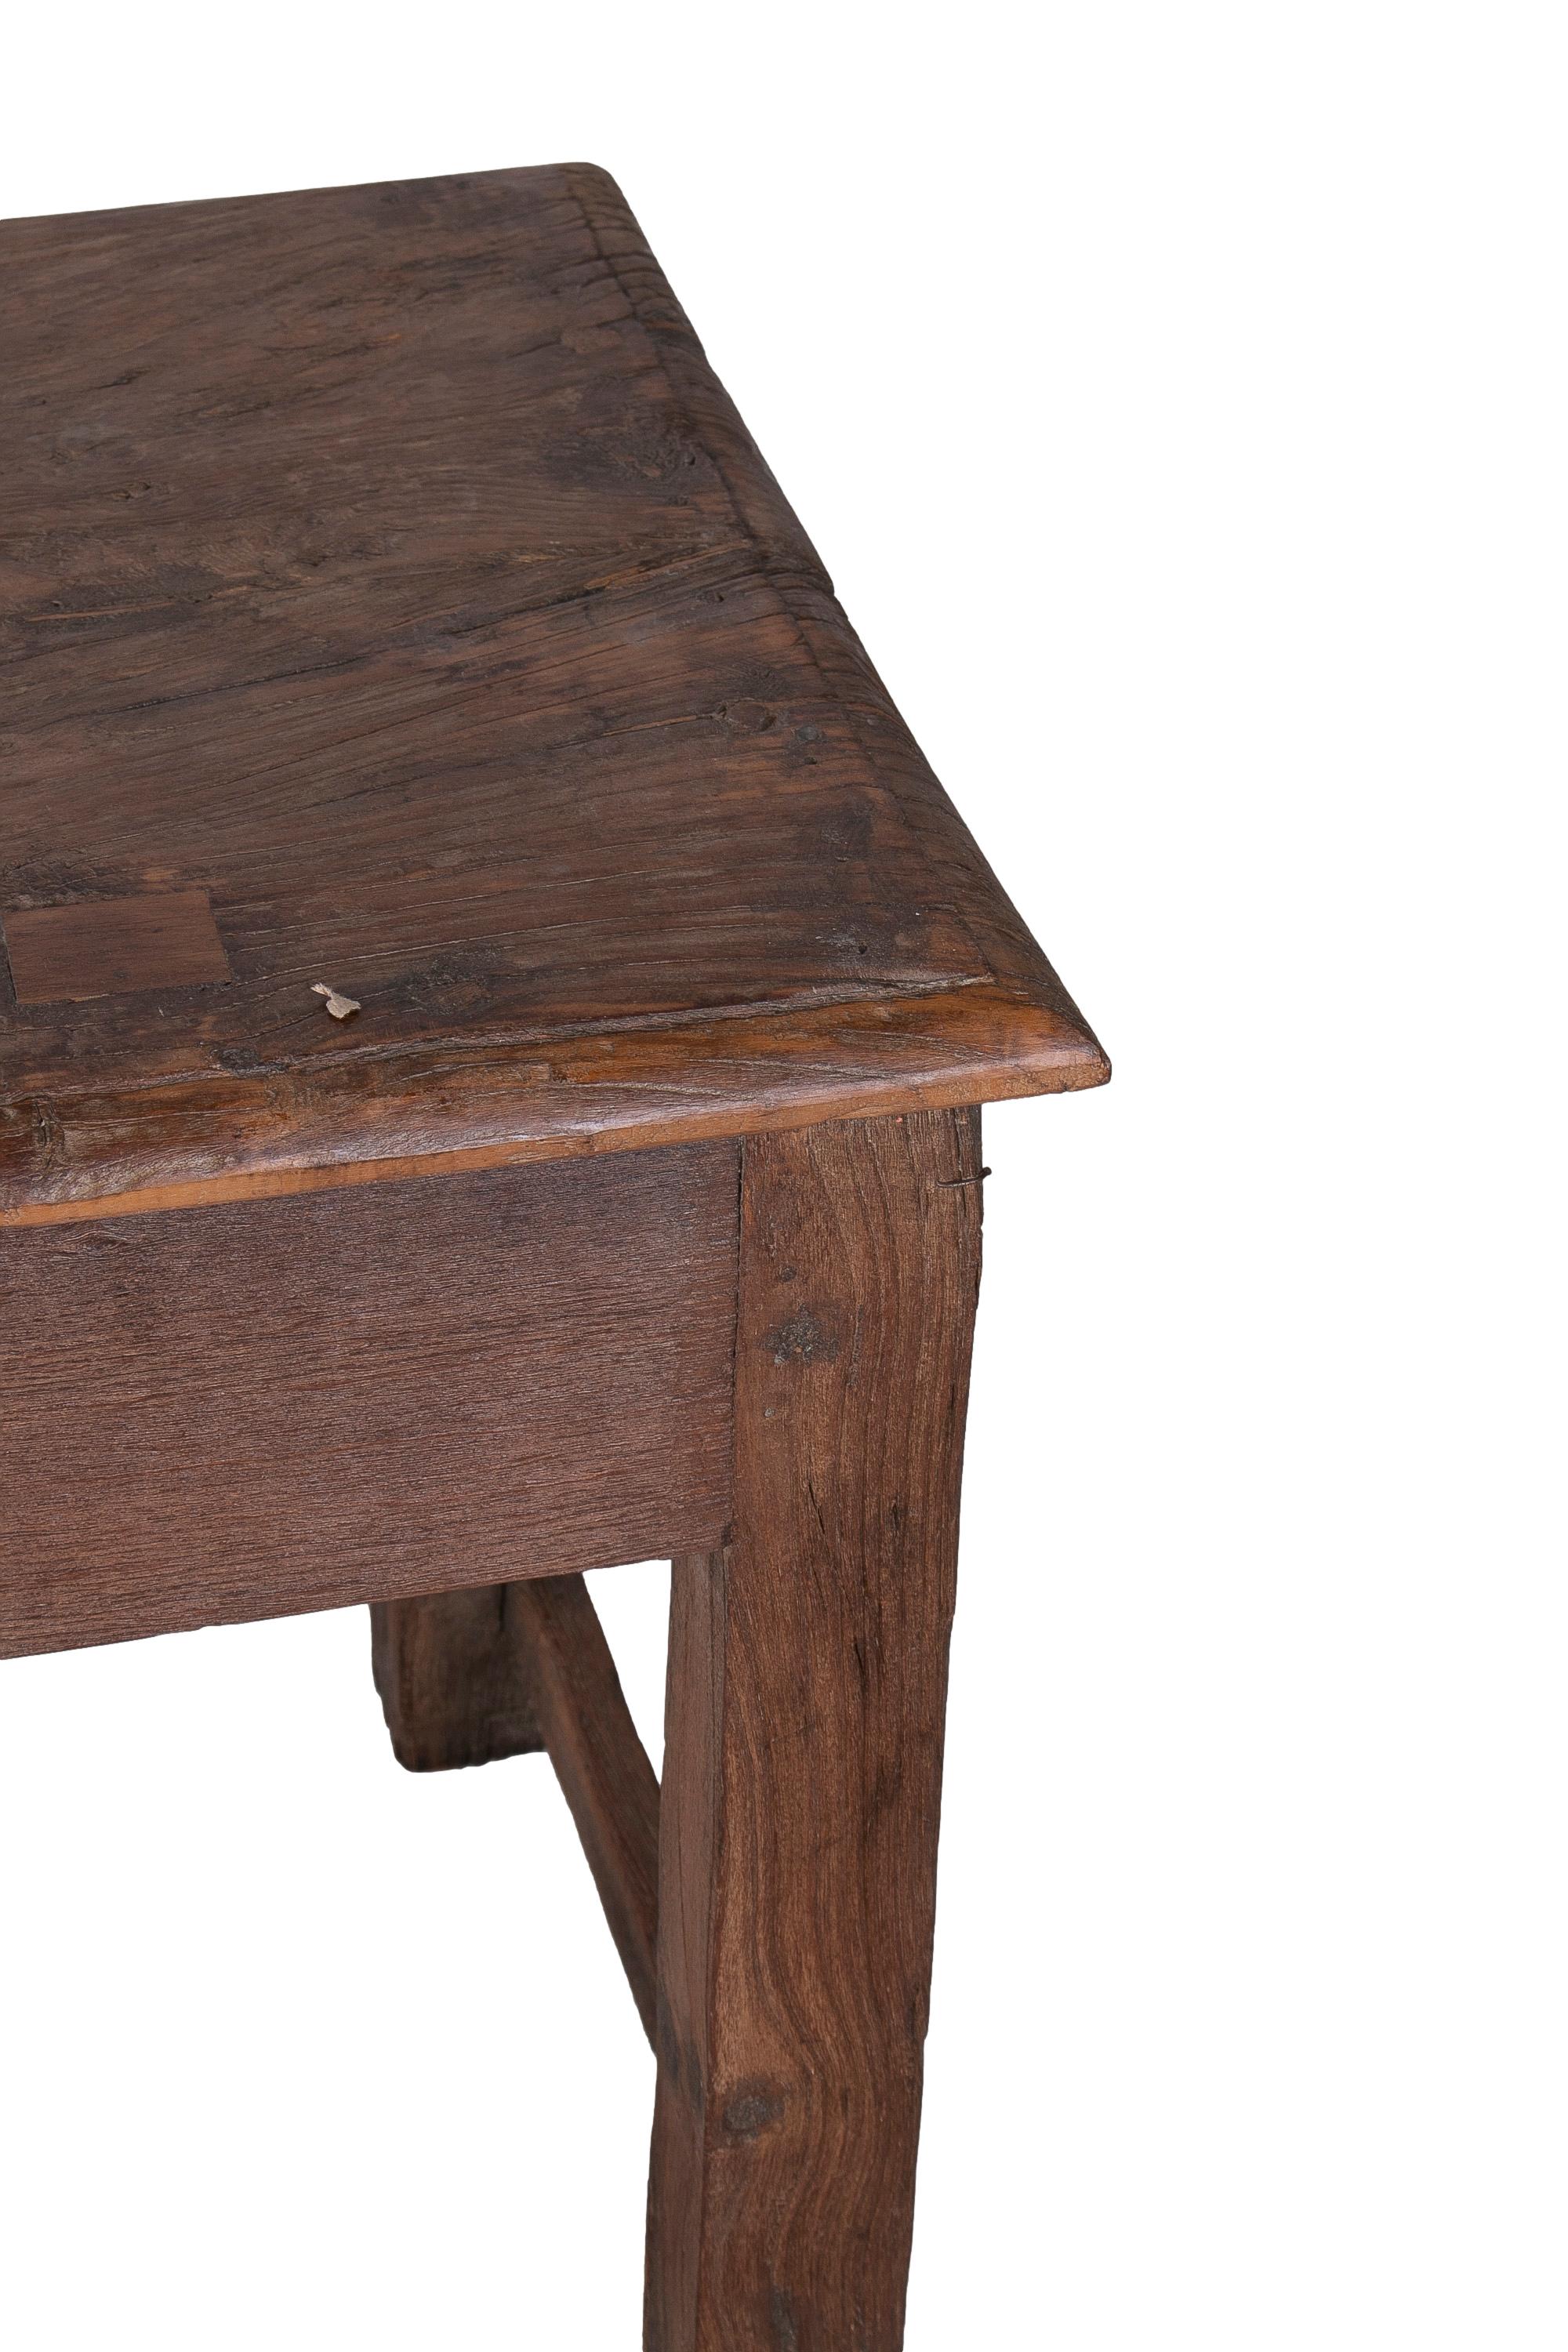 1970s Spanish Industrial Wooden 2-Drawer Table w/ Crossbeam Legs For Sale 8